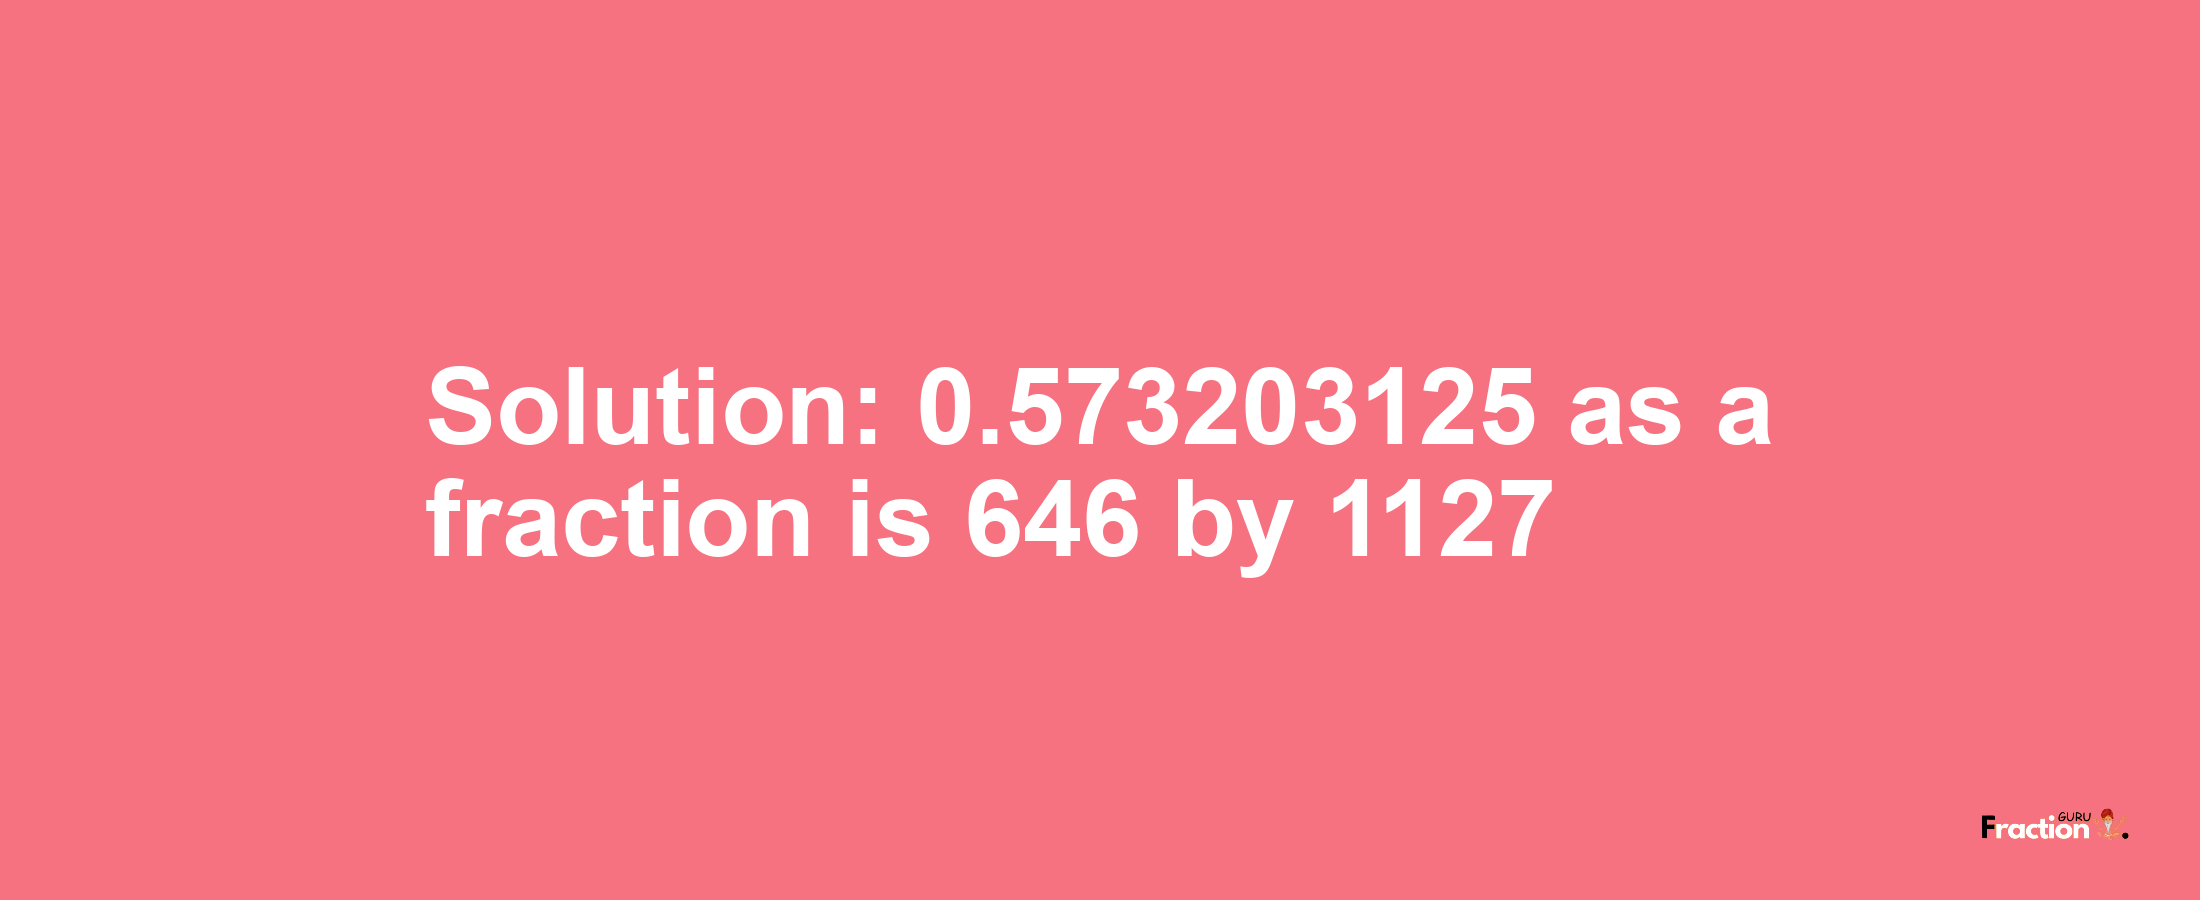 Solution:0.573203125 as a fraction is 646/1127